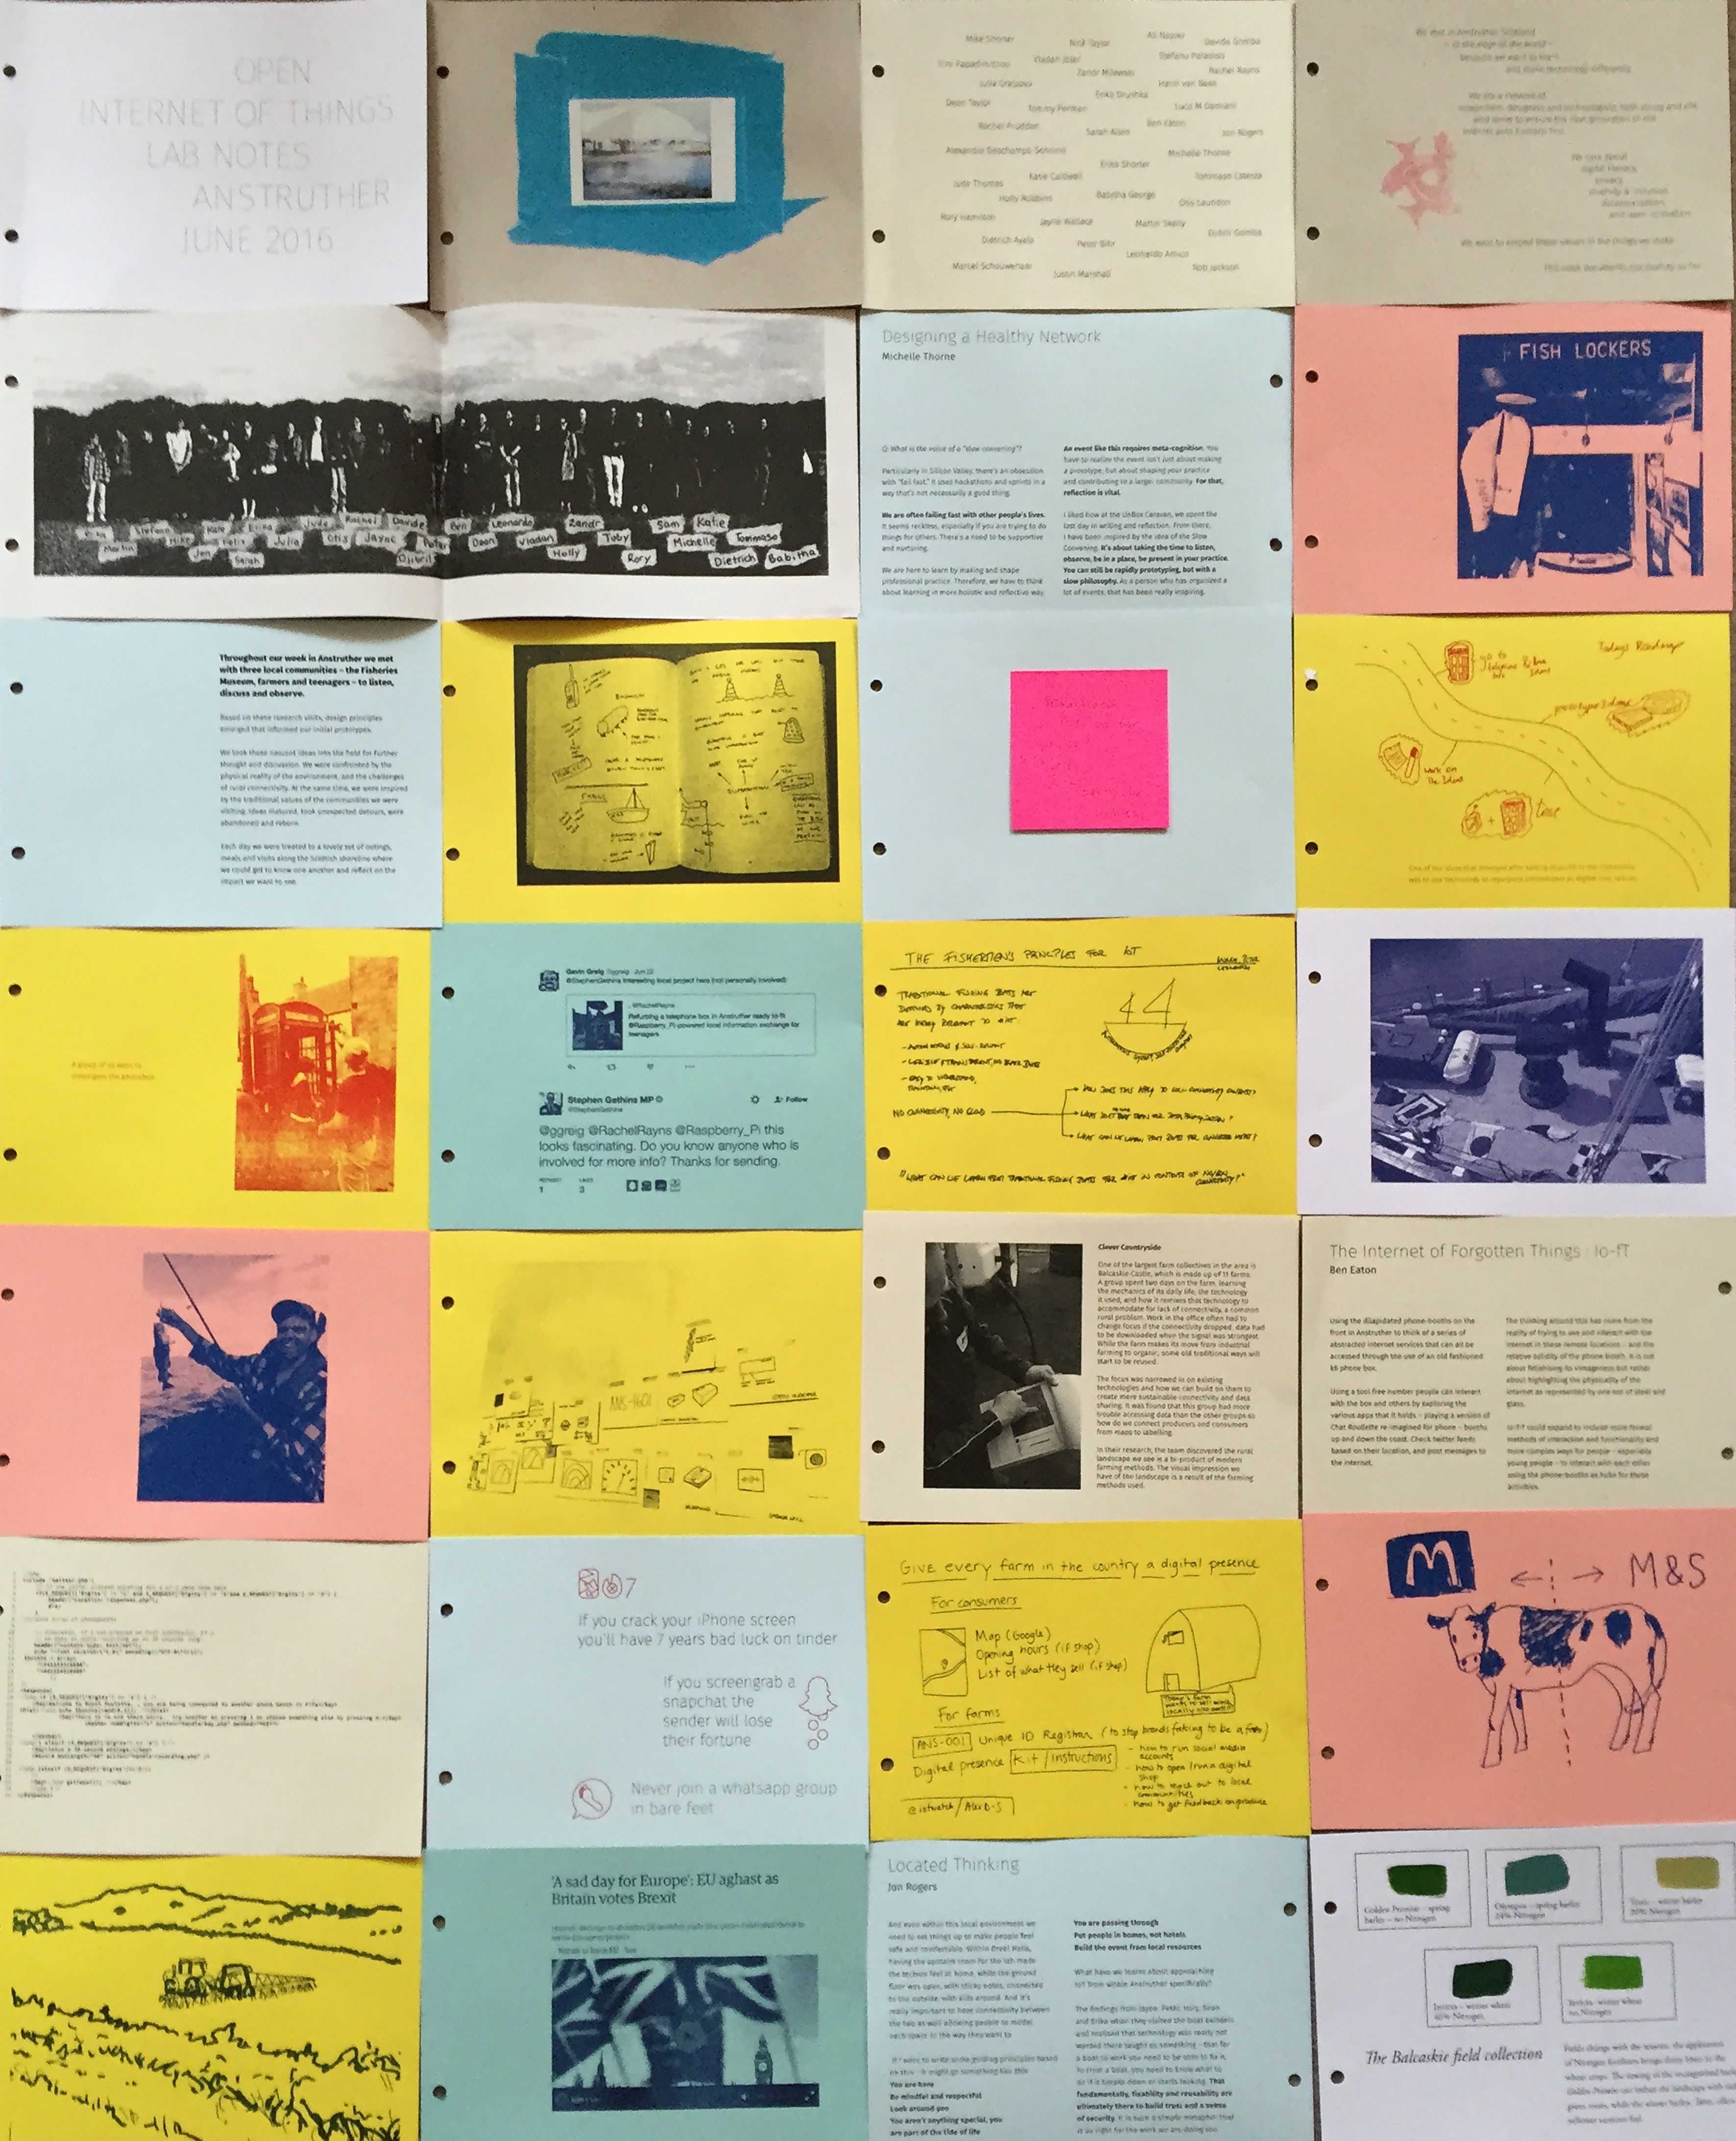 Image: Open Internet of Things Lab notes, Mozilla Open IoT, Anstruther Scotland Design Sprint, June 2016